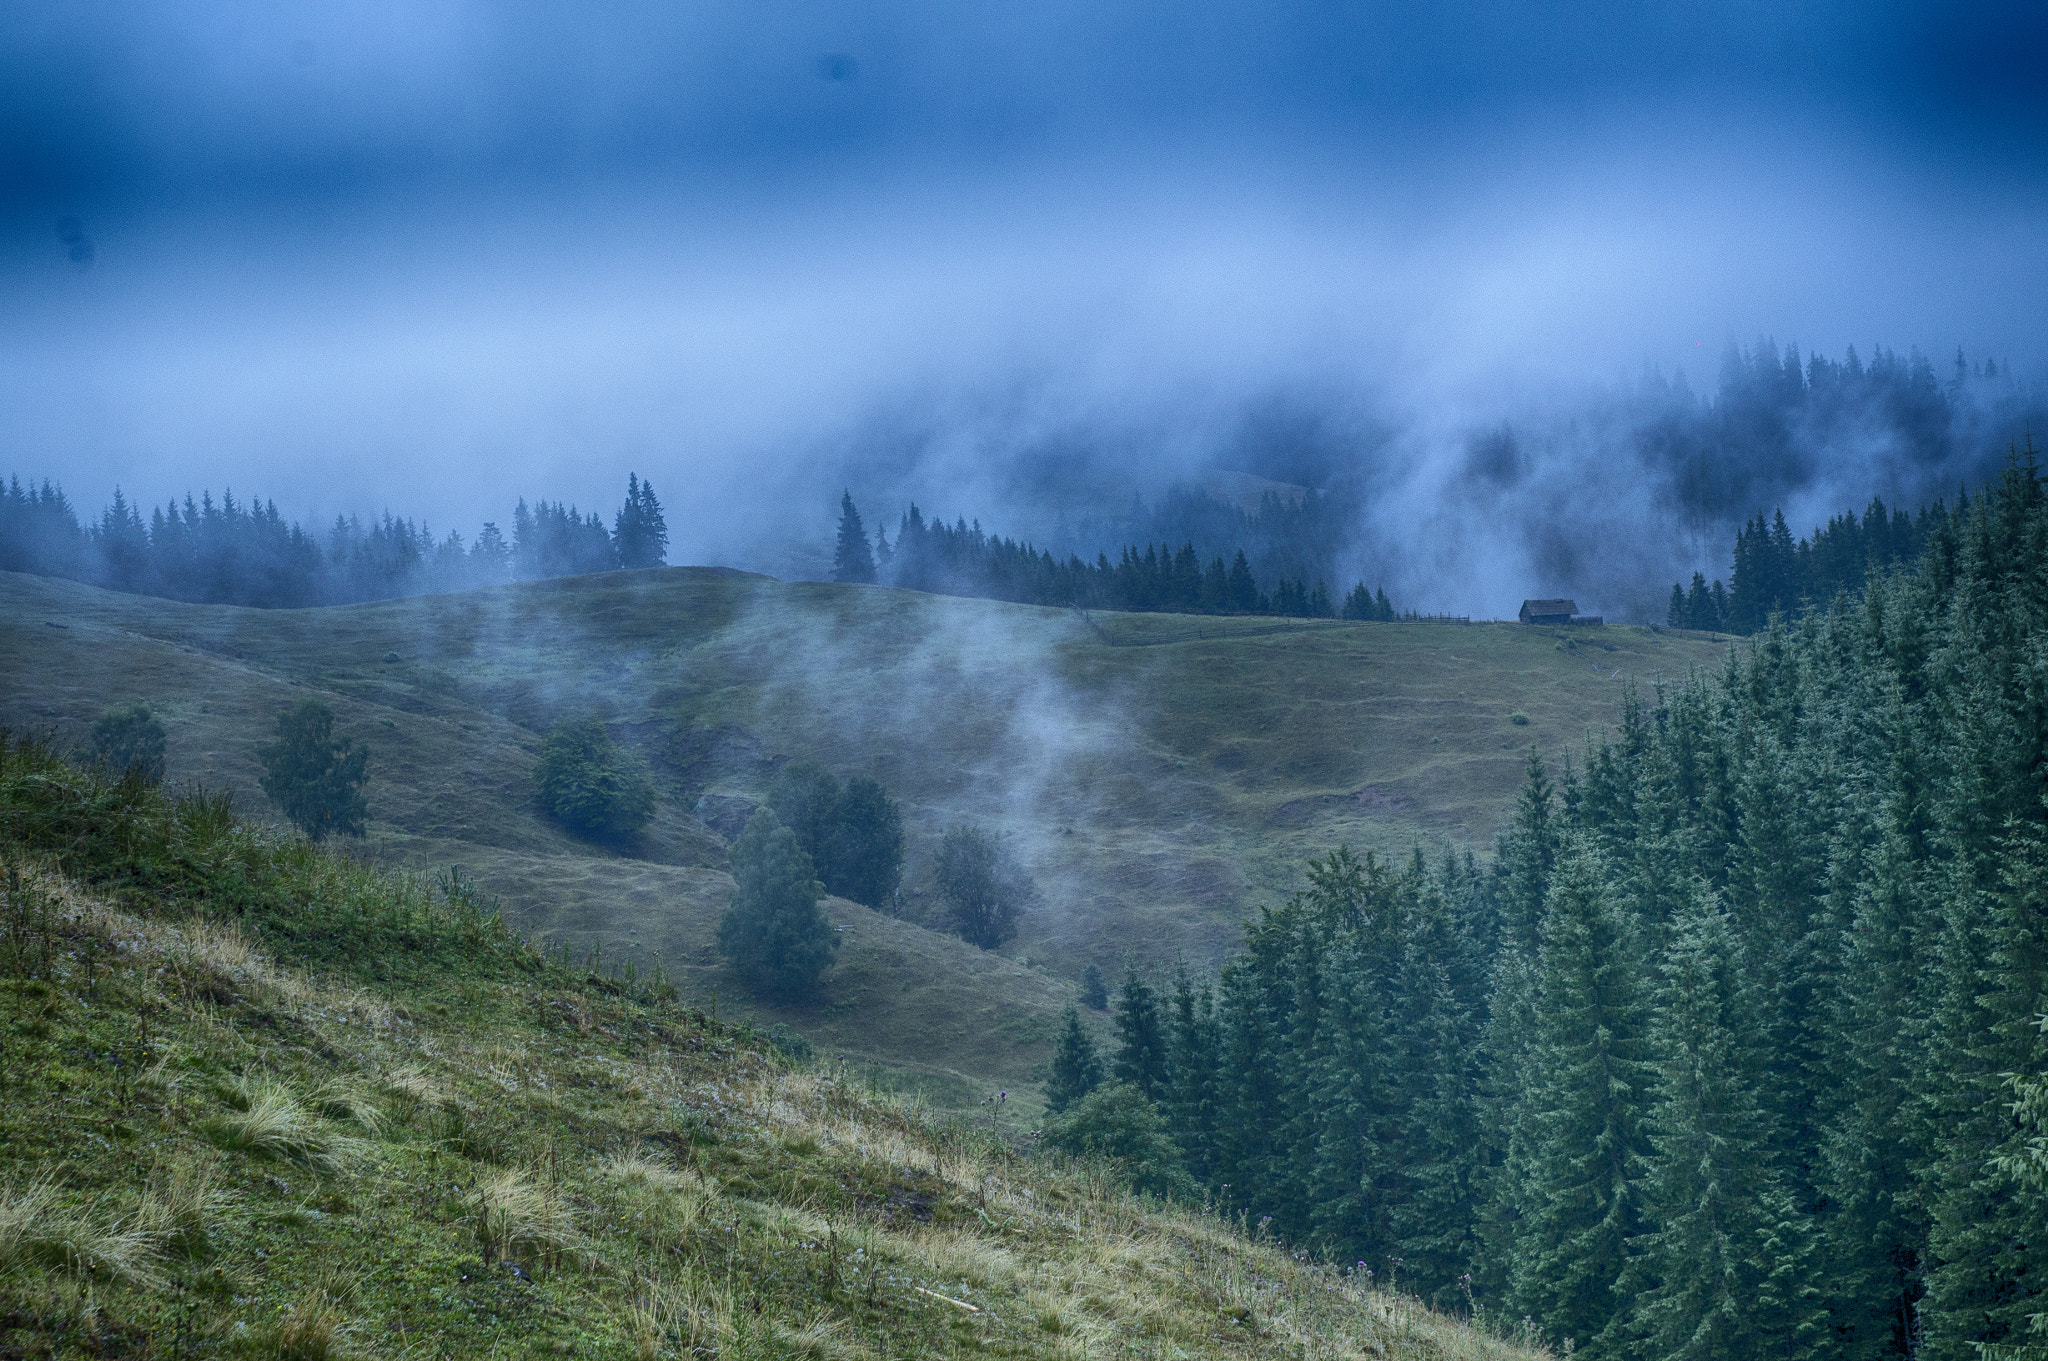 Sony SLT-A57 sample photo. My misty mornings on the mountains part 2 photography